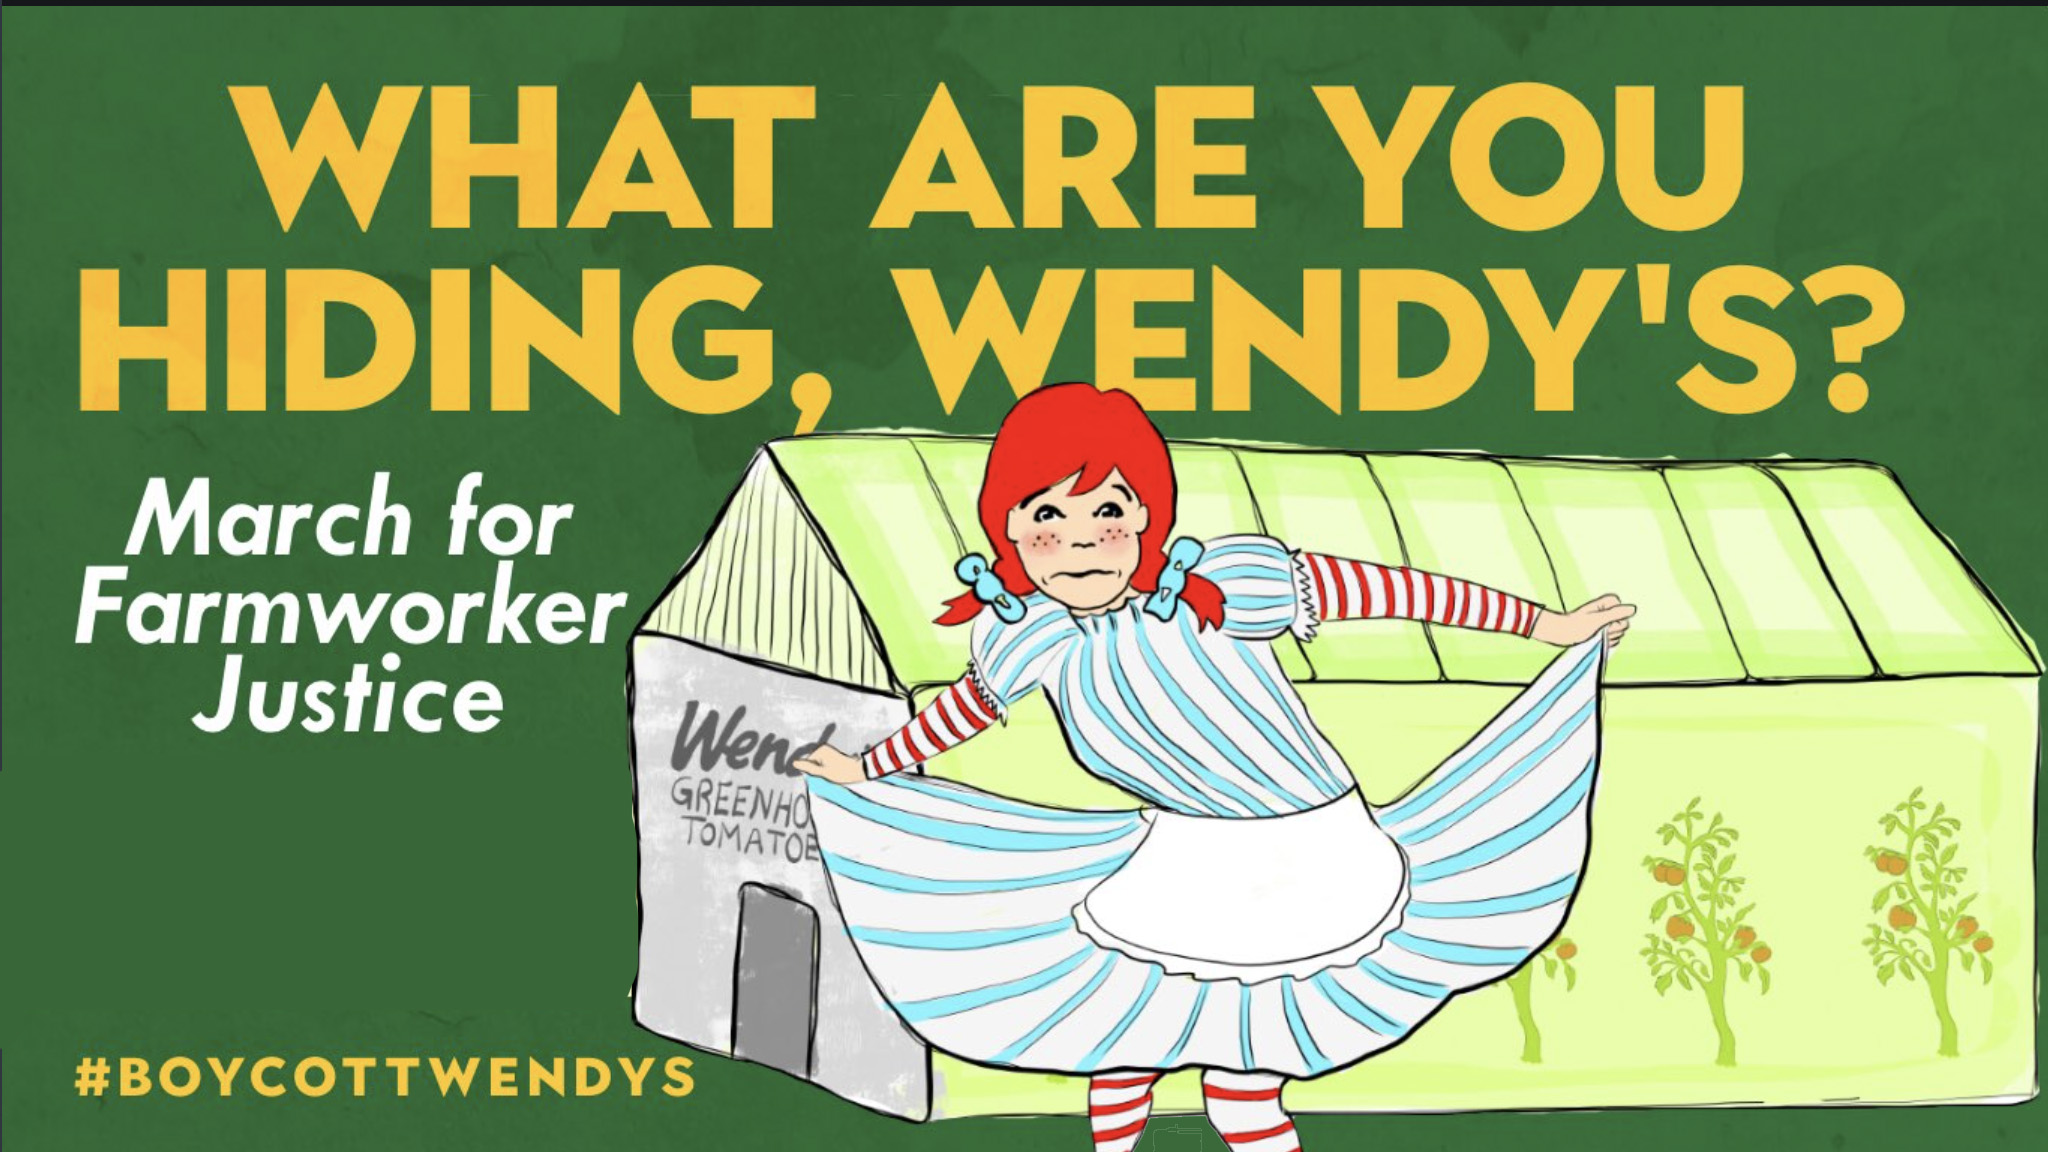 CALL NOW: Call Wendy’s leaders and storm social media as hundreds